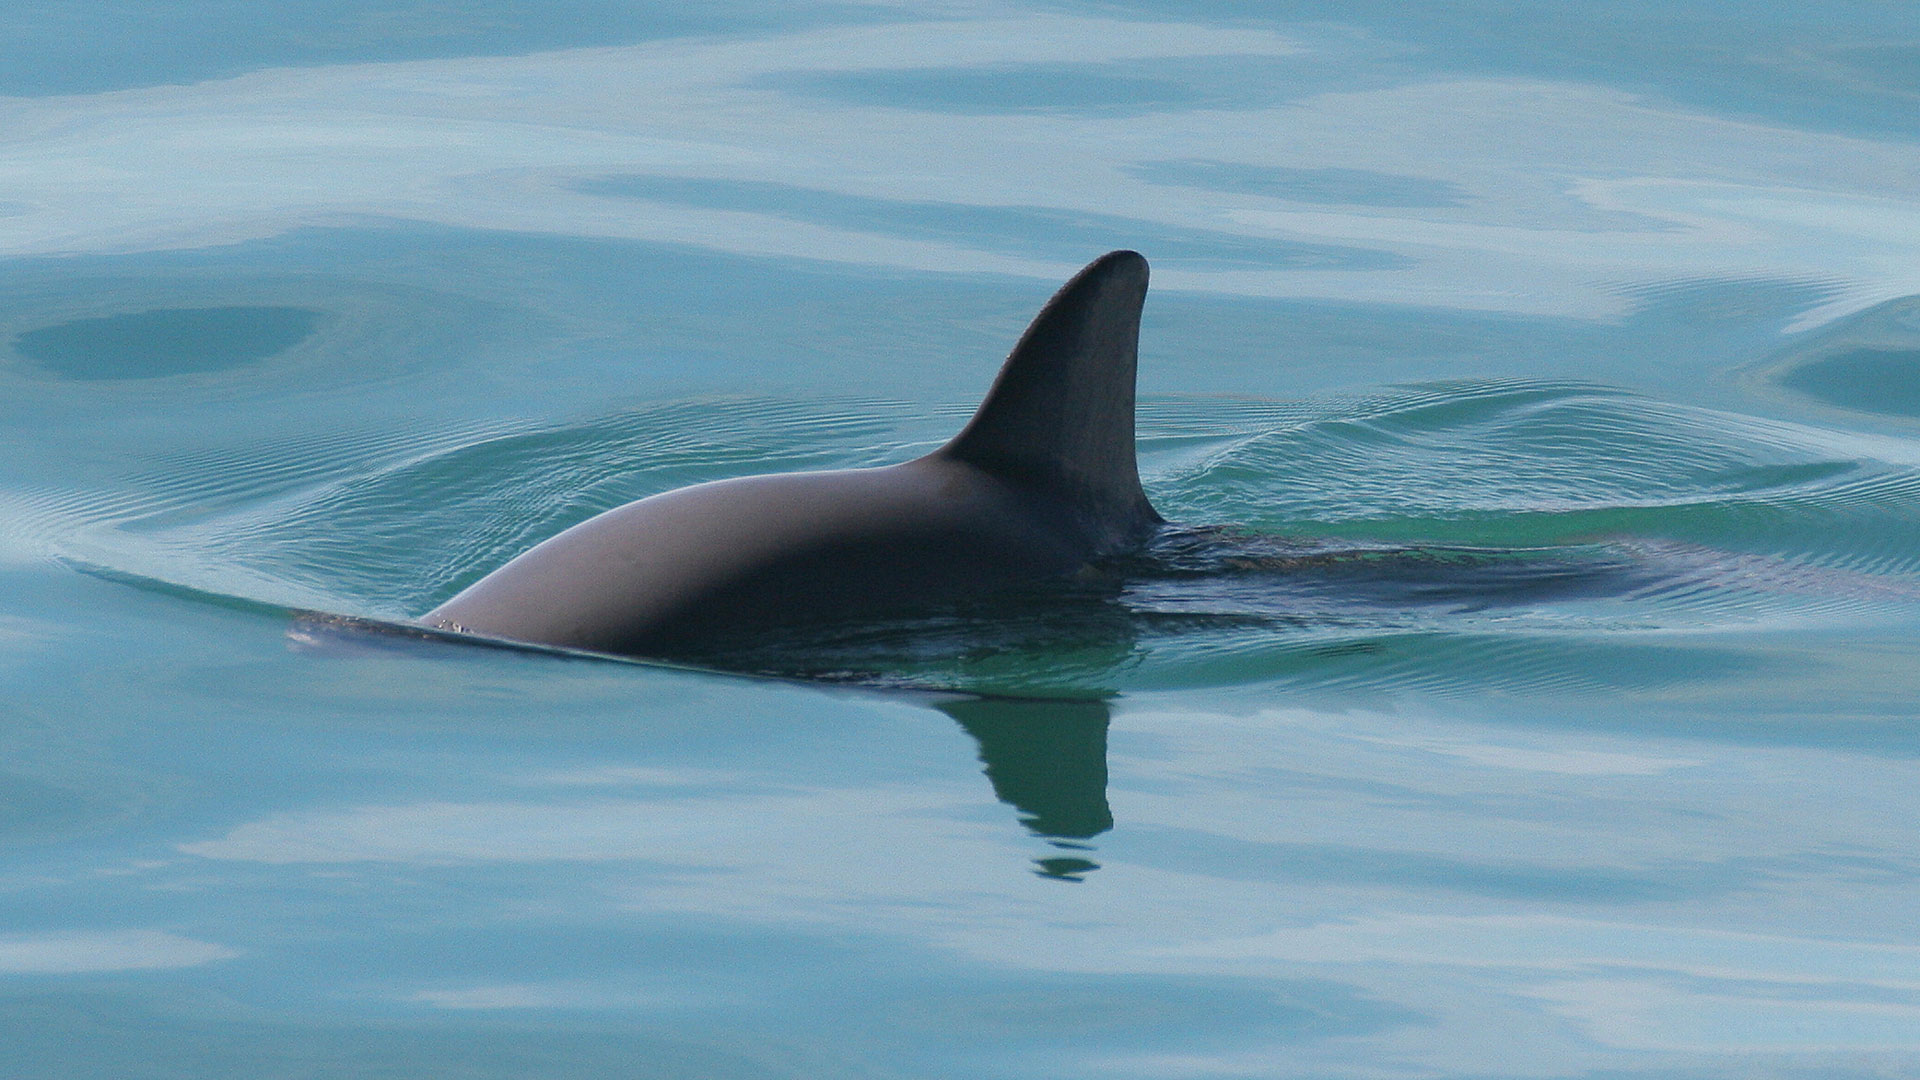 The vaquita is a critically endangered porpoise that lives in the northern part of the Sea of Cortez. It is considered the smallest and most endangered cetacean in the world. 